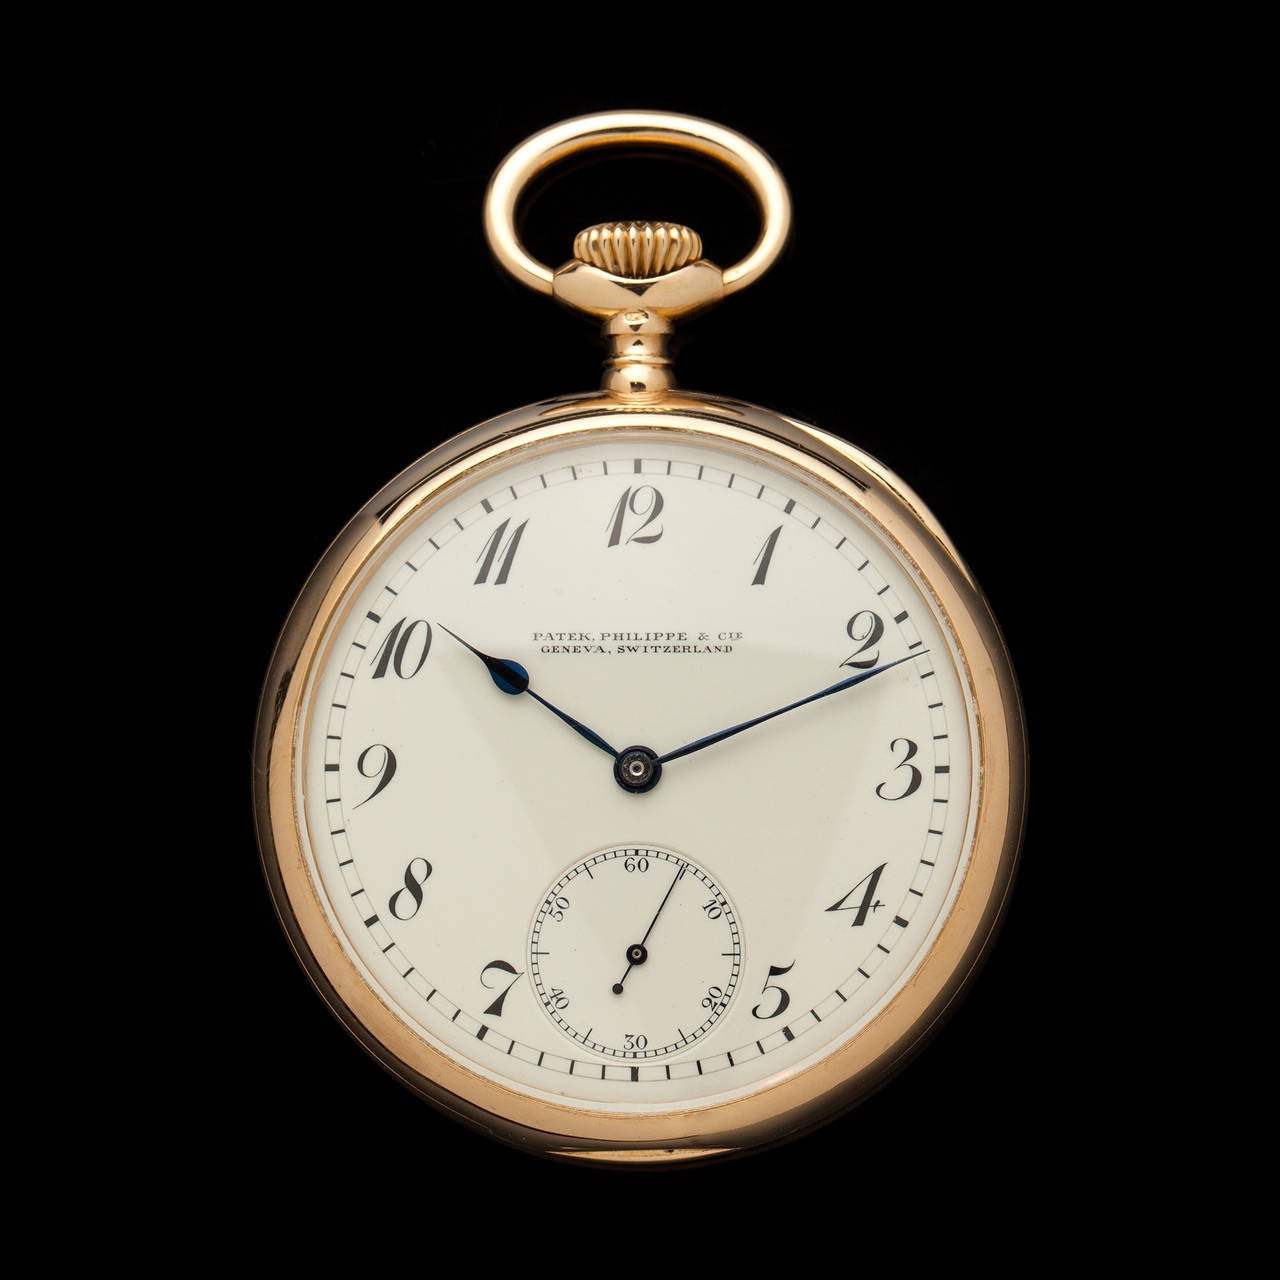 Patek Philippe 18k Yellow Gold Pocket Watch, Retailed by Shreve Crump & Low, with Silvered Dial and Stylized Arabic Numbers. The watch has an eighteen-jewel movement.